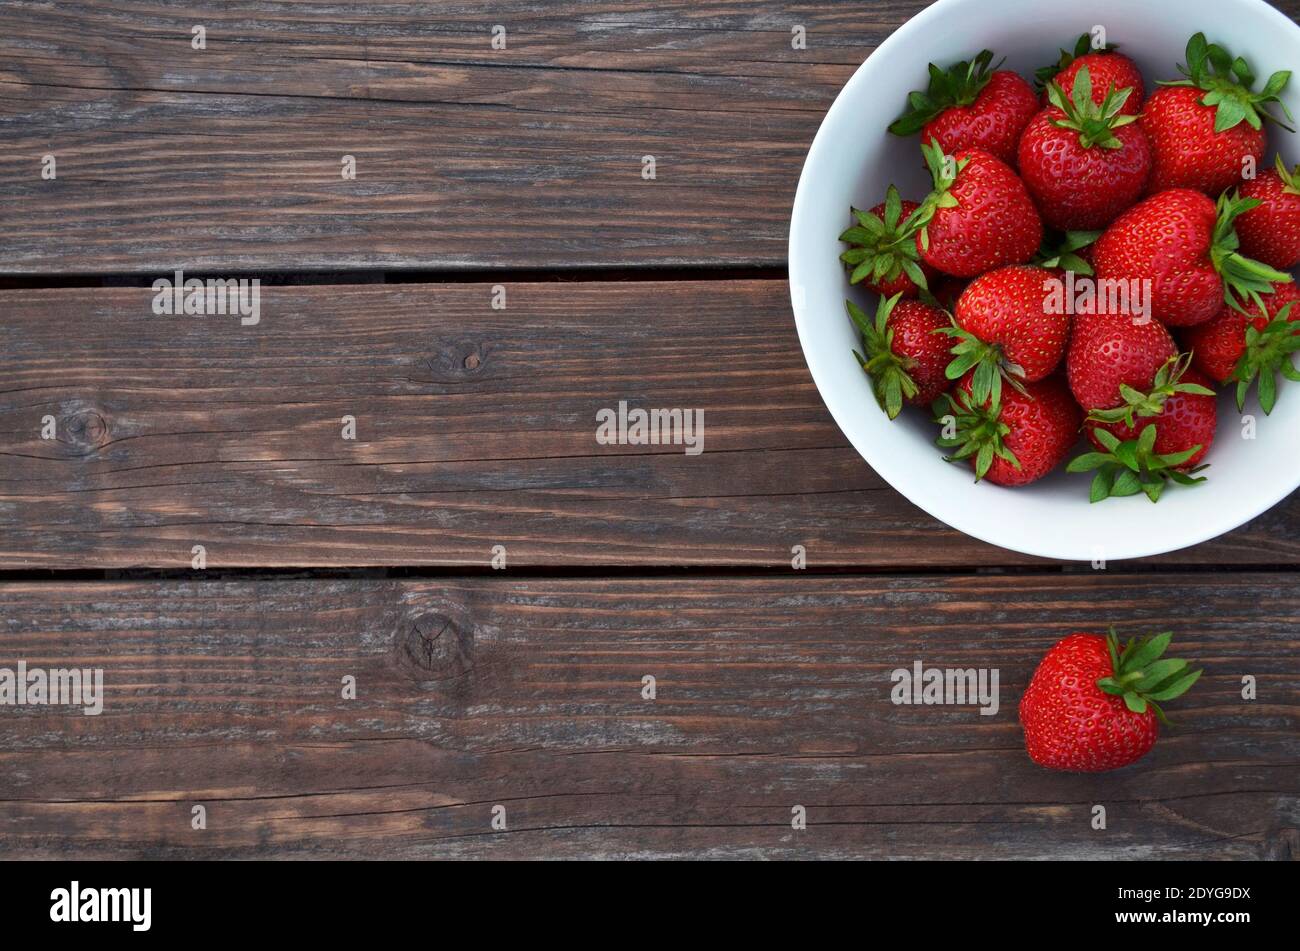 Fresh red strawberries in a white bowl on a old wooden table close-up with copy space, top view. Healthy eating concept. Stock Photo